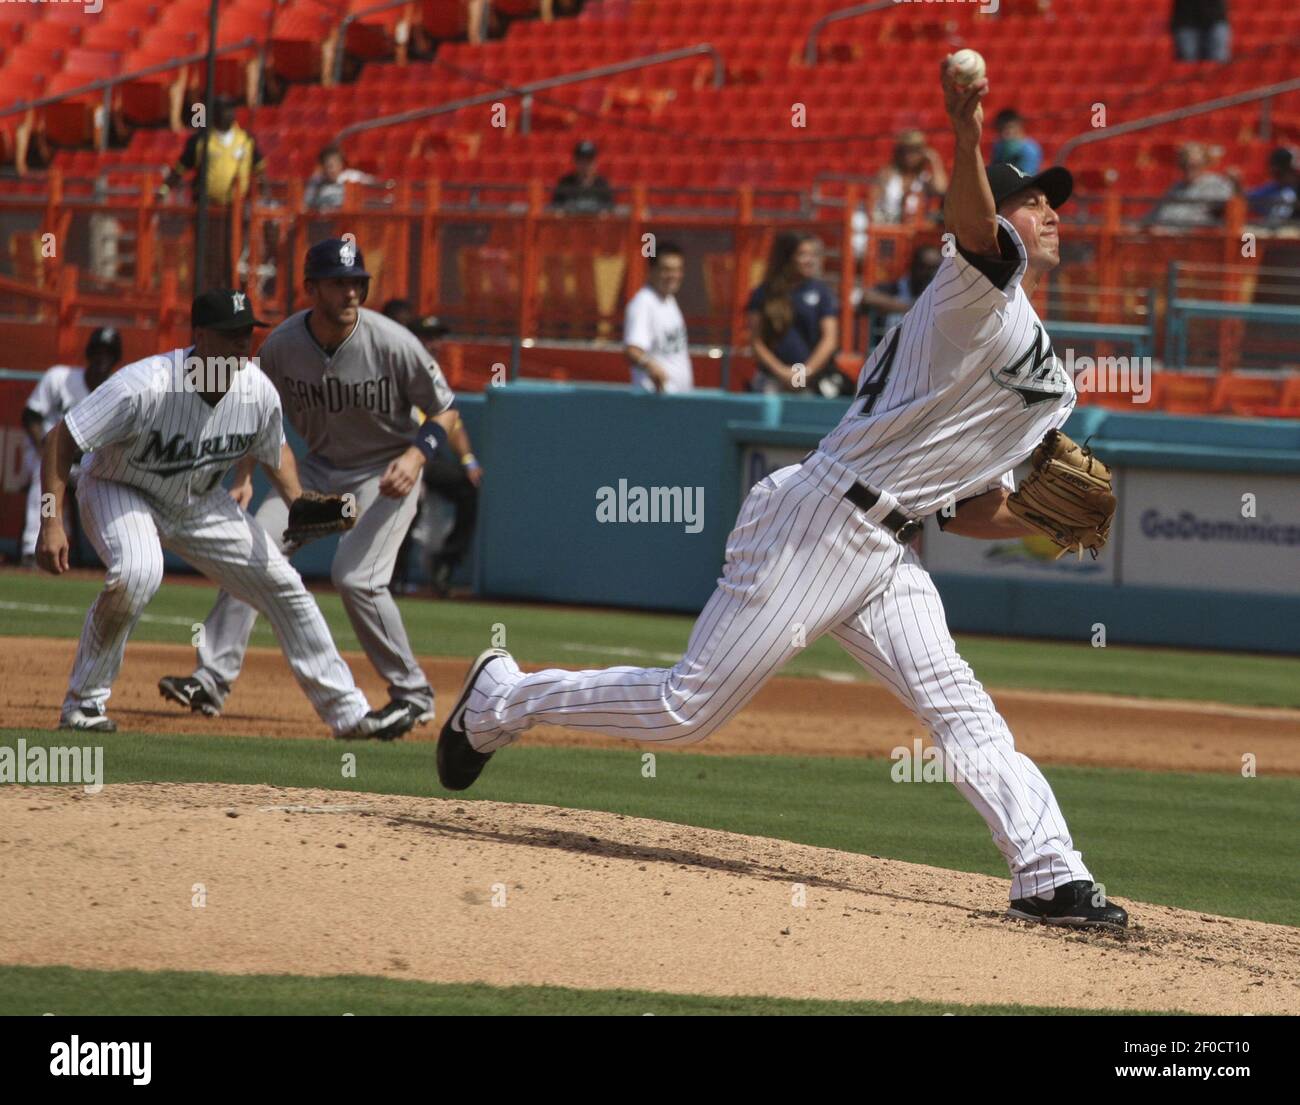 The Florida Marlins' Brian Sanches pitches in the fifth inning against the  San Diego Padres at Sun Life Stadium in Miami Gardens, Florida, on  Thursday, July 21, 2011. The Padres topped the